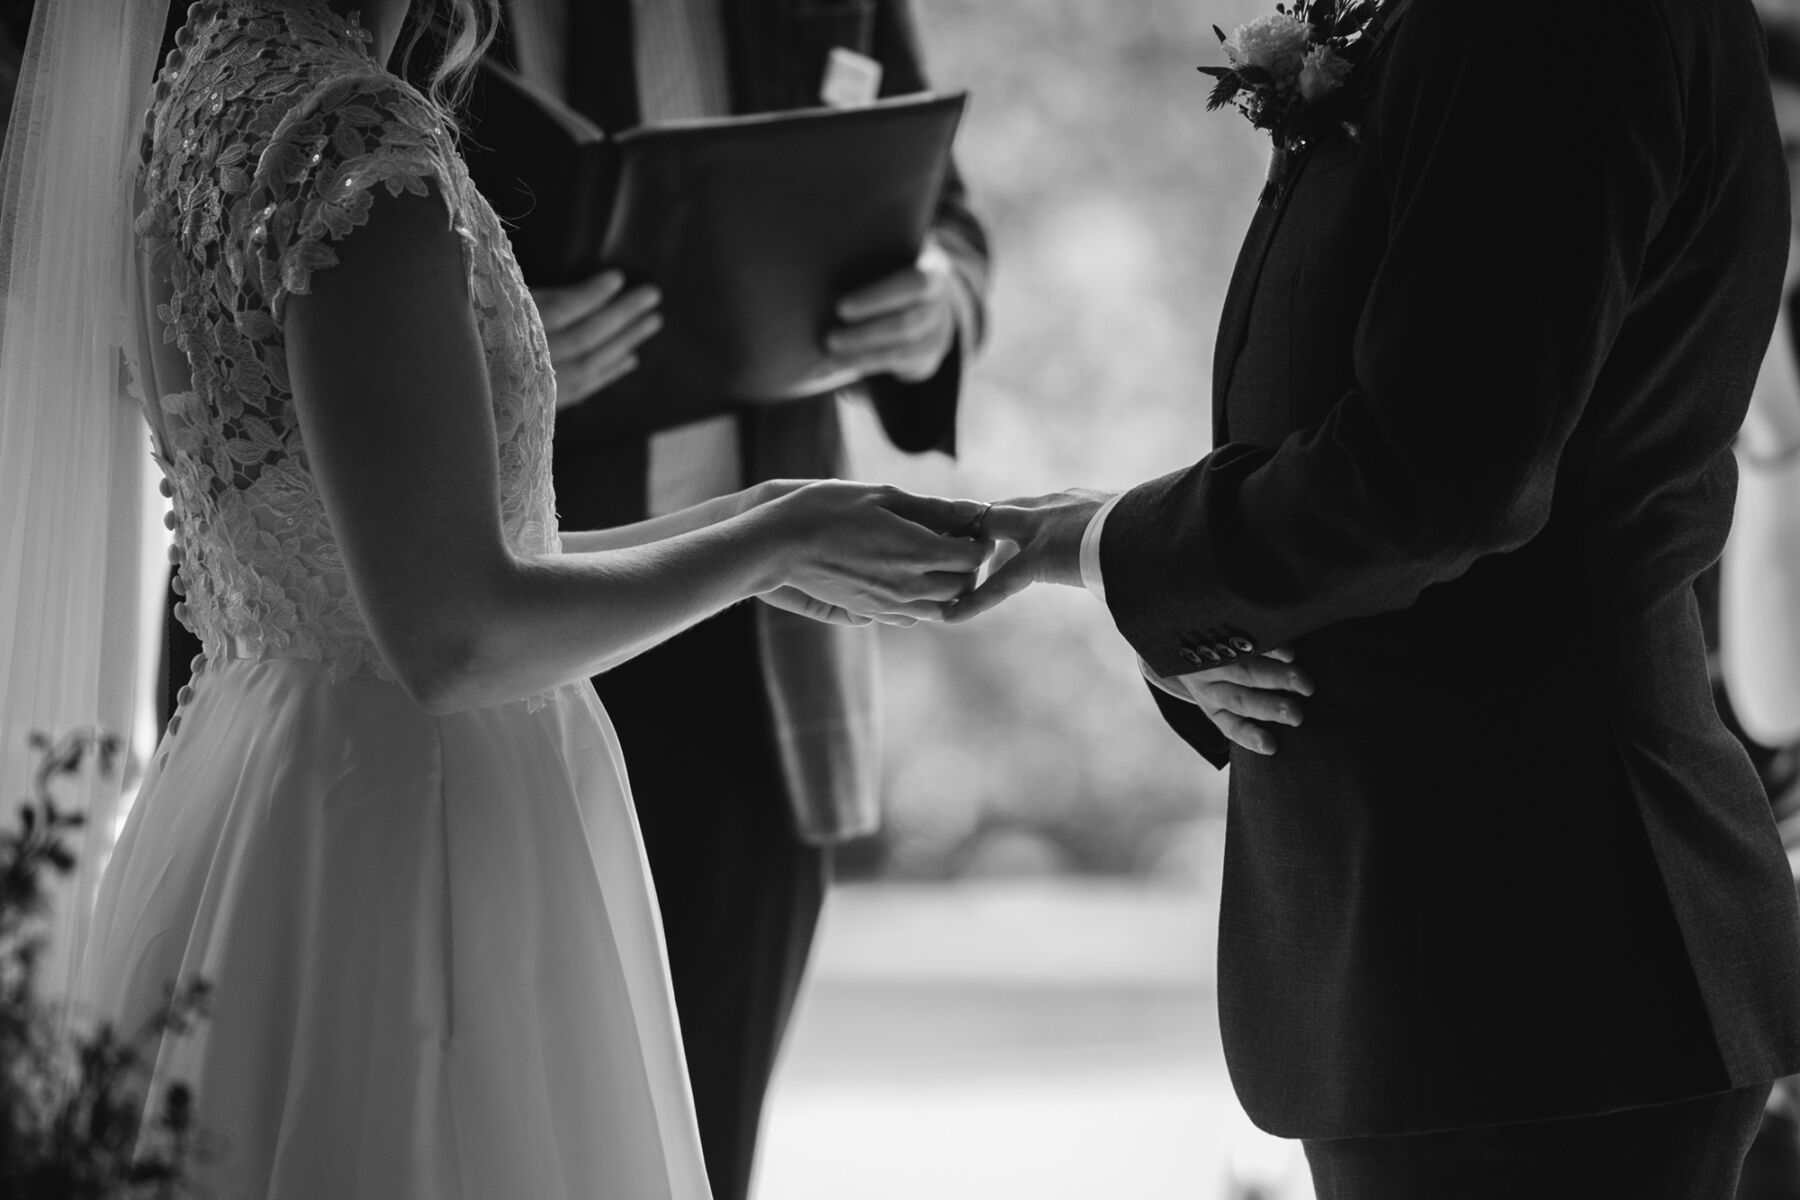 Bride and groom holding hands during their wedding ceremony.